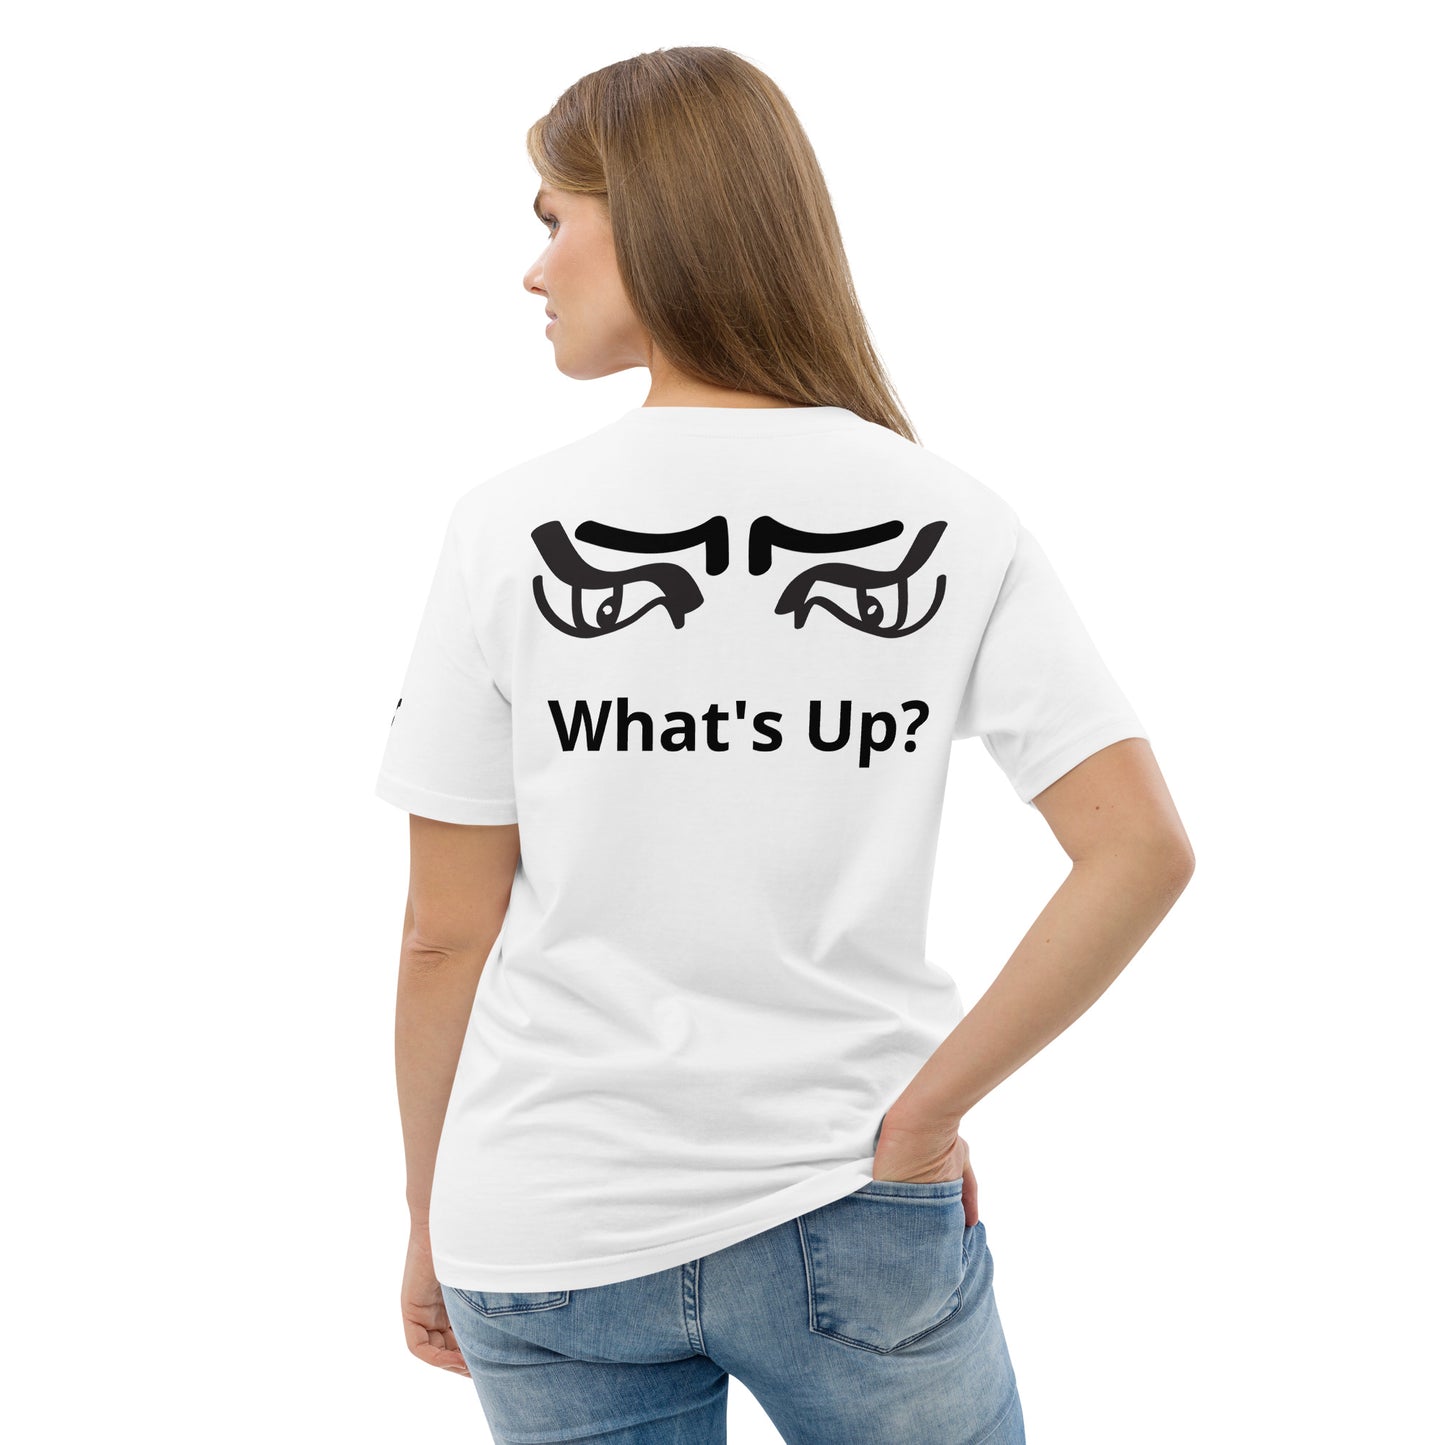 Embrace your individuality and make a bold statement with the "What's Up?" BeSculpt Unisex Organic Cotton T-shirt – because sometimes, it's okay to let your clothes do the talking!